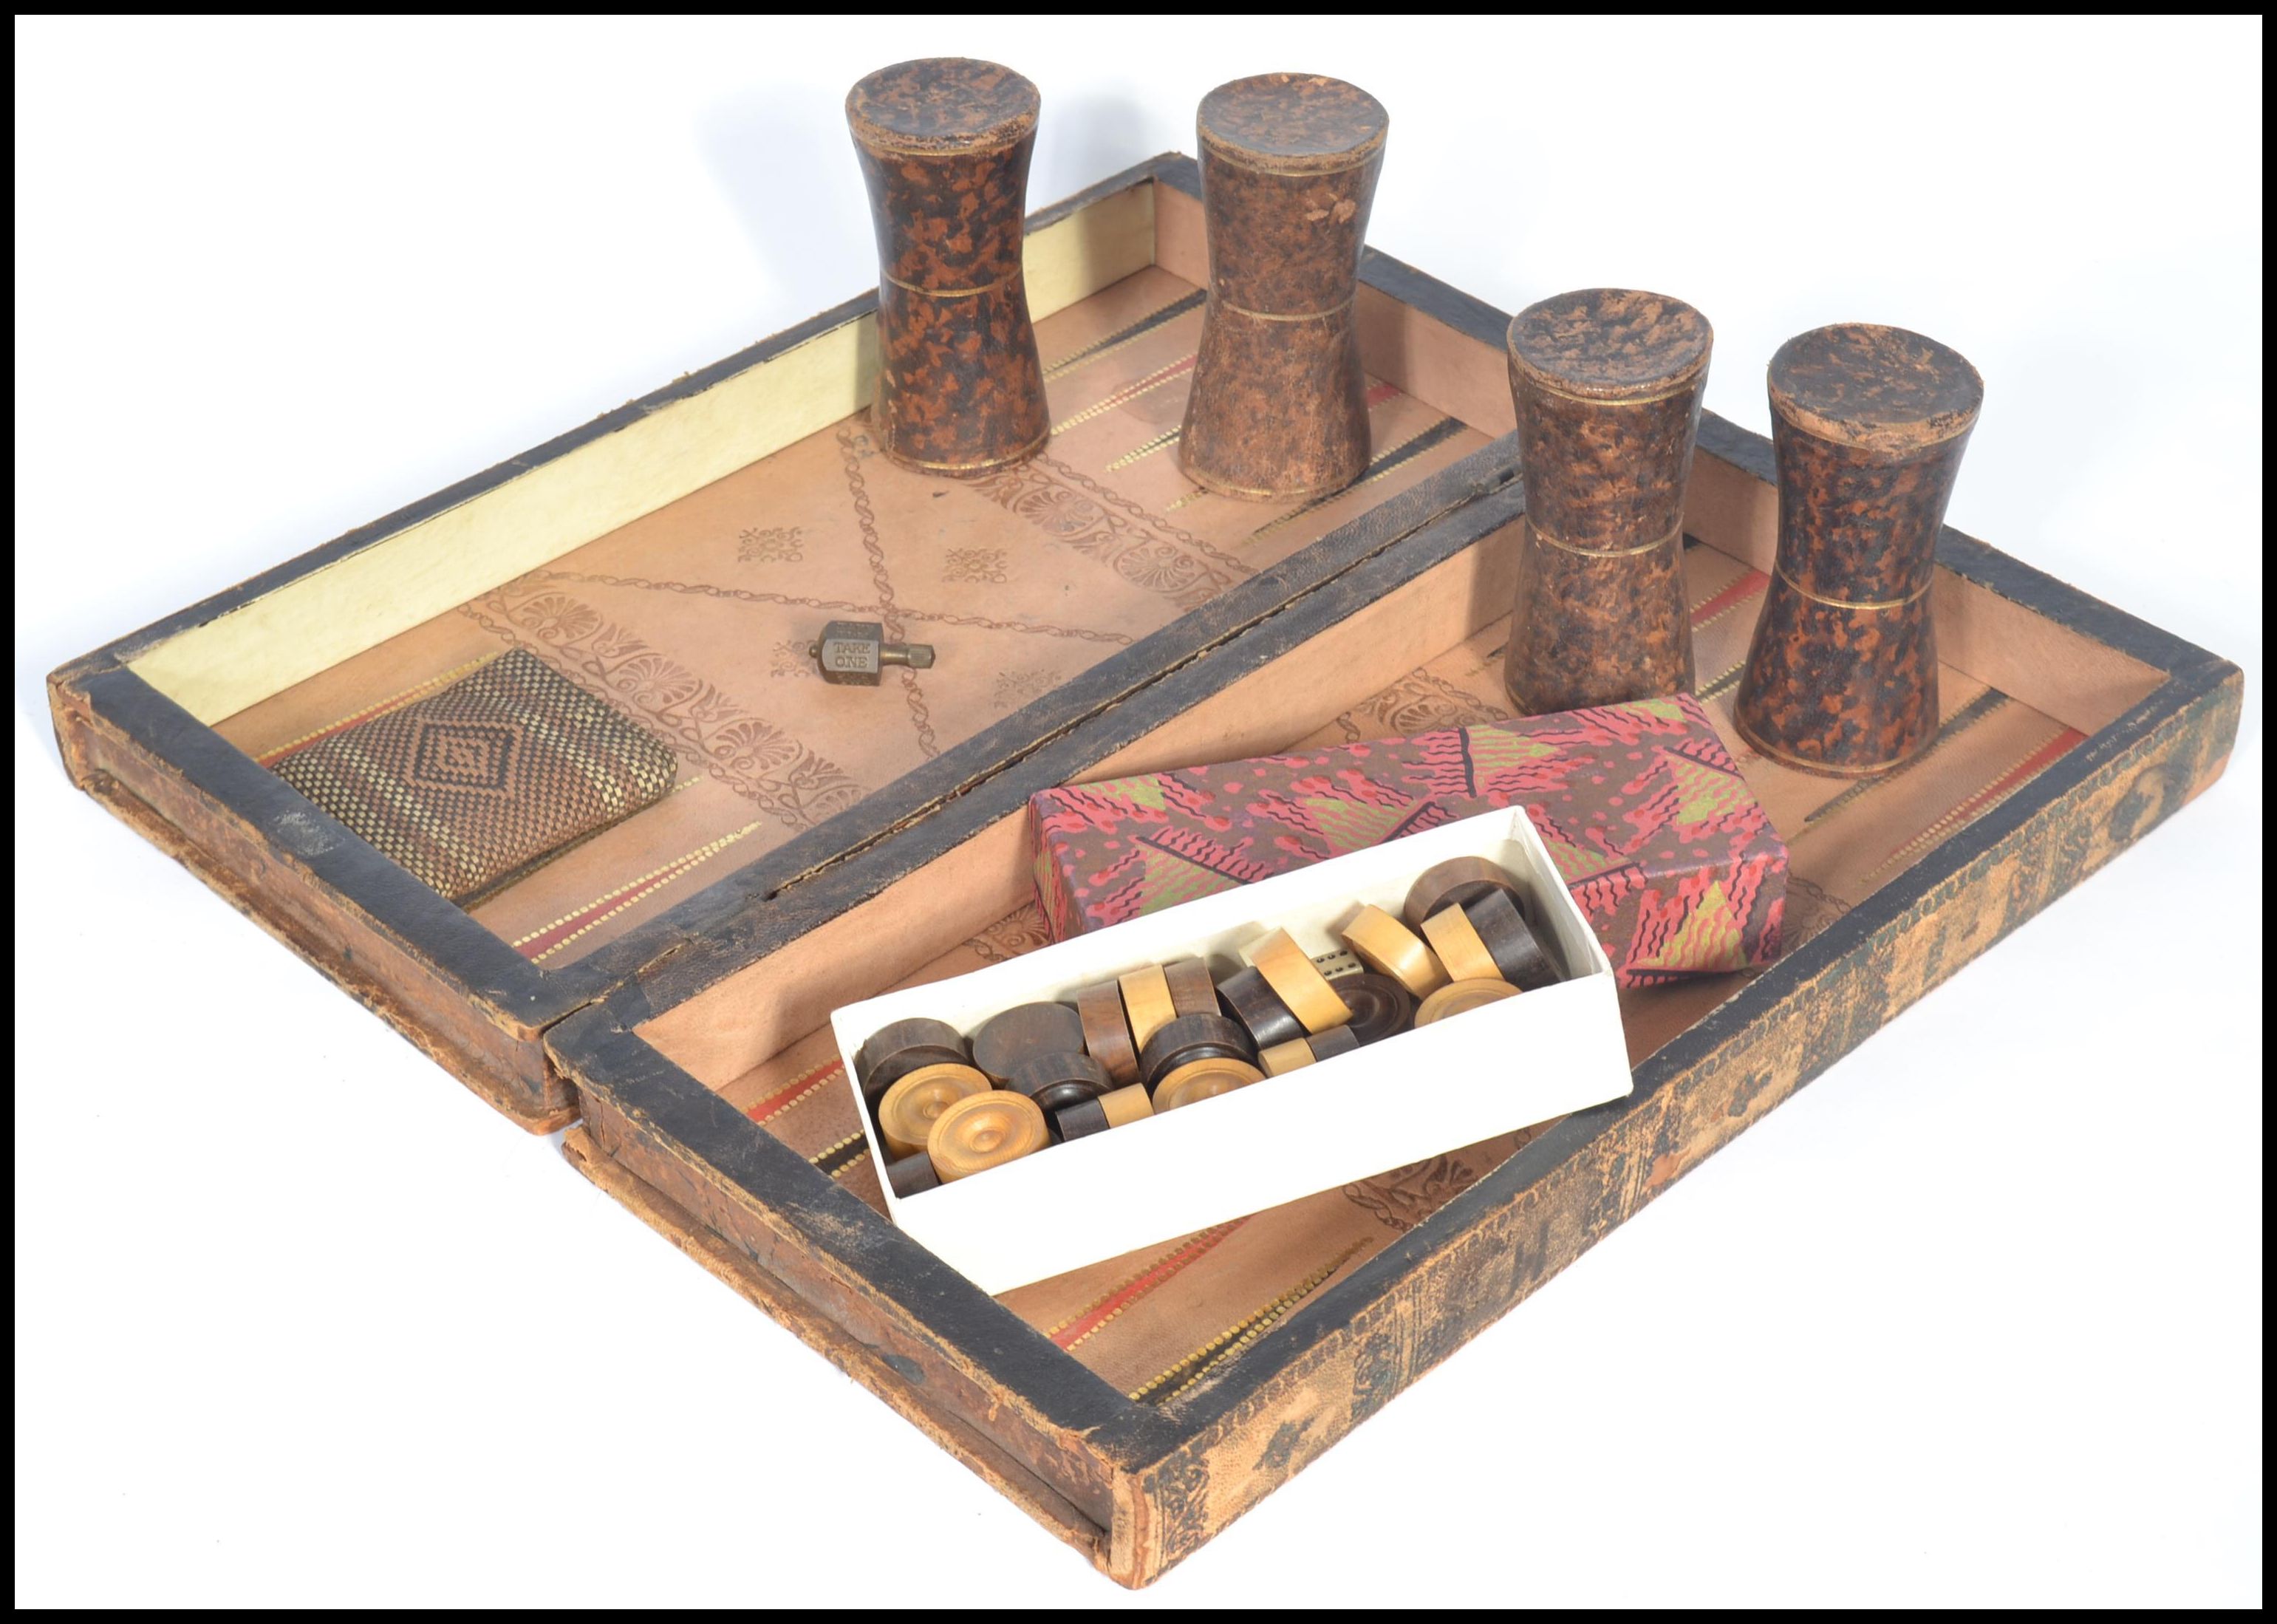 An early 20th century chess board games compendium set containing a draughts set , dice shakers.